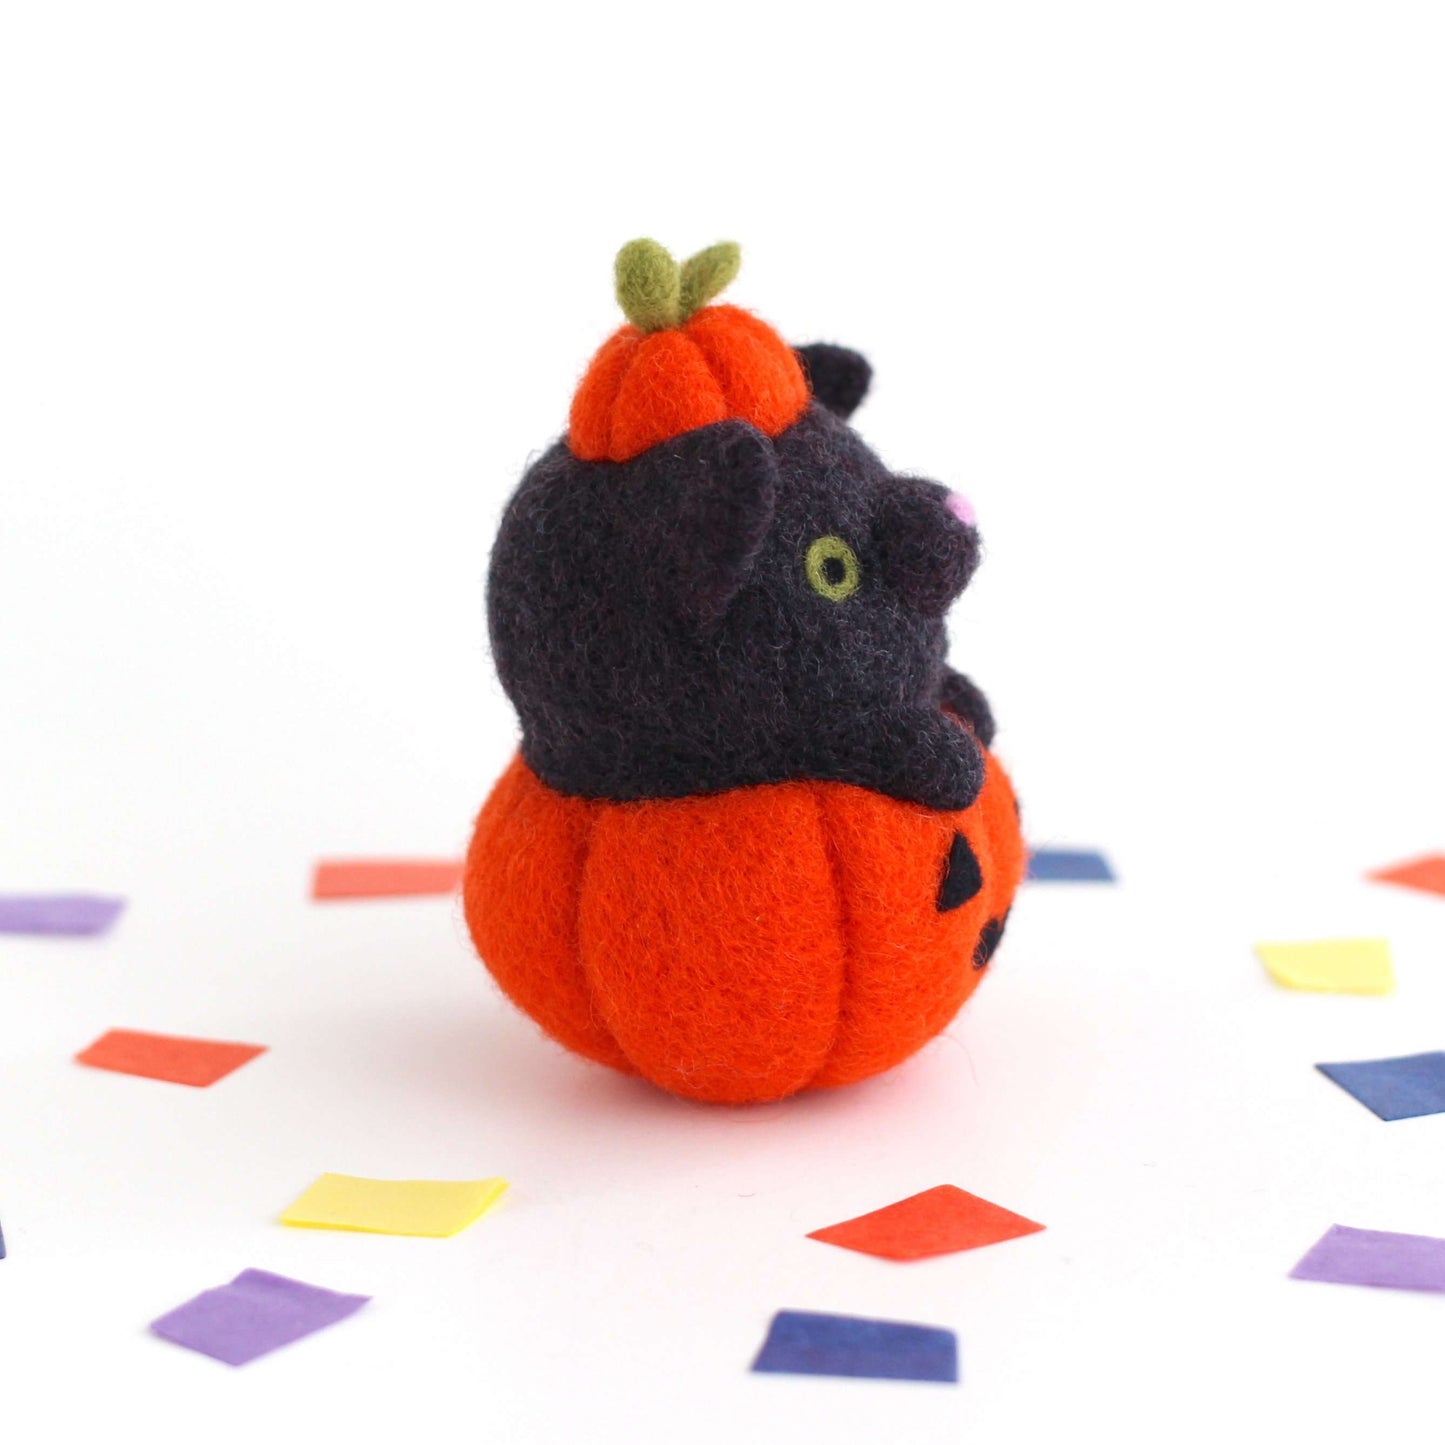 Needle Felted Black Cat in Jack-o'-Lantern (Bright Orange Variant) by Wild Whimsy Woolies